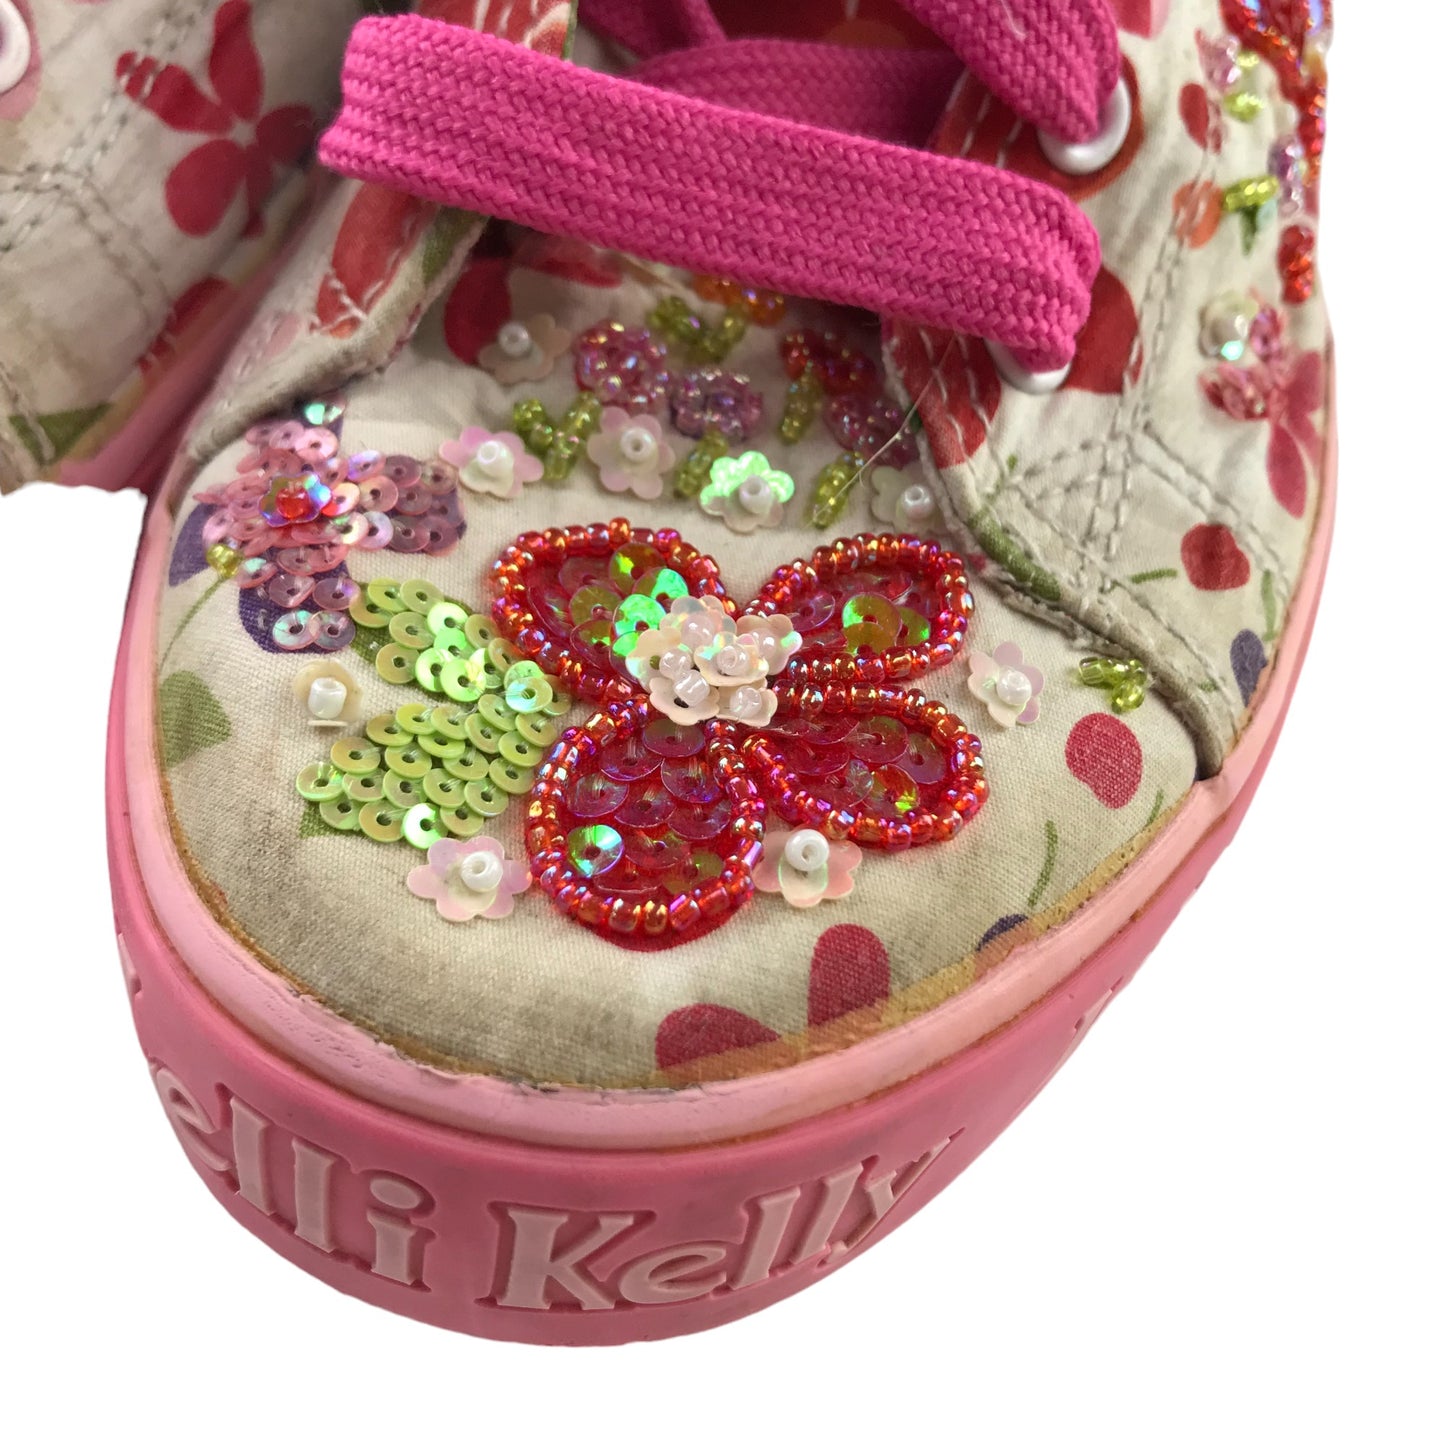 Lelli Kelly Trainers Shoe Size UK5 EUR38 Pink Floral Sequin detailed Ankle High Tops